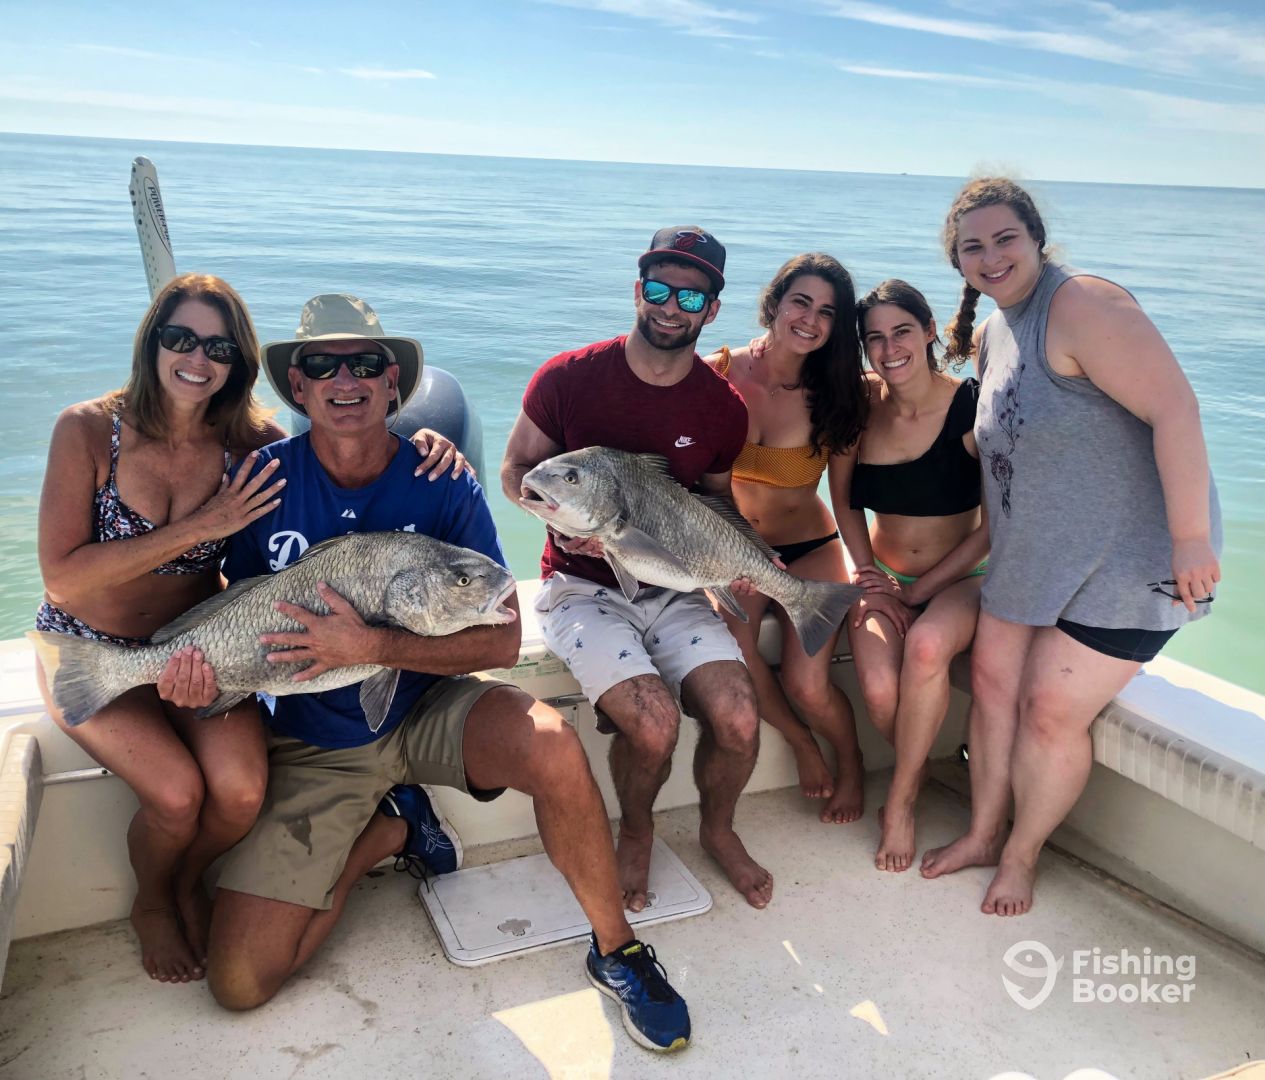 Best rated marco island fishing charters 239 301 8913 home page say what fi...